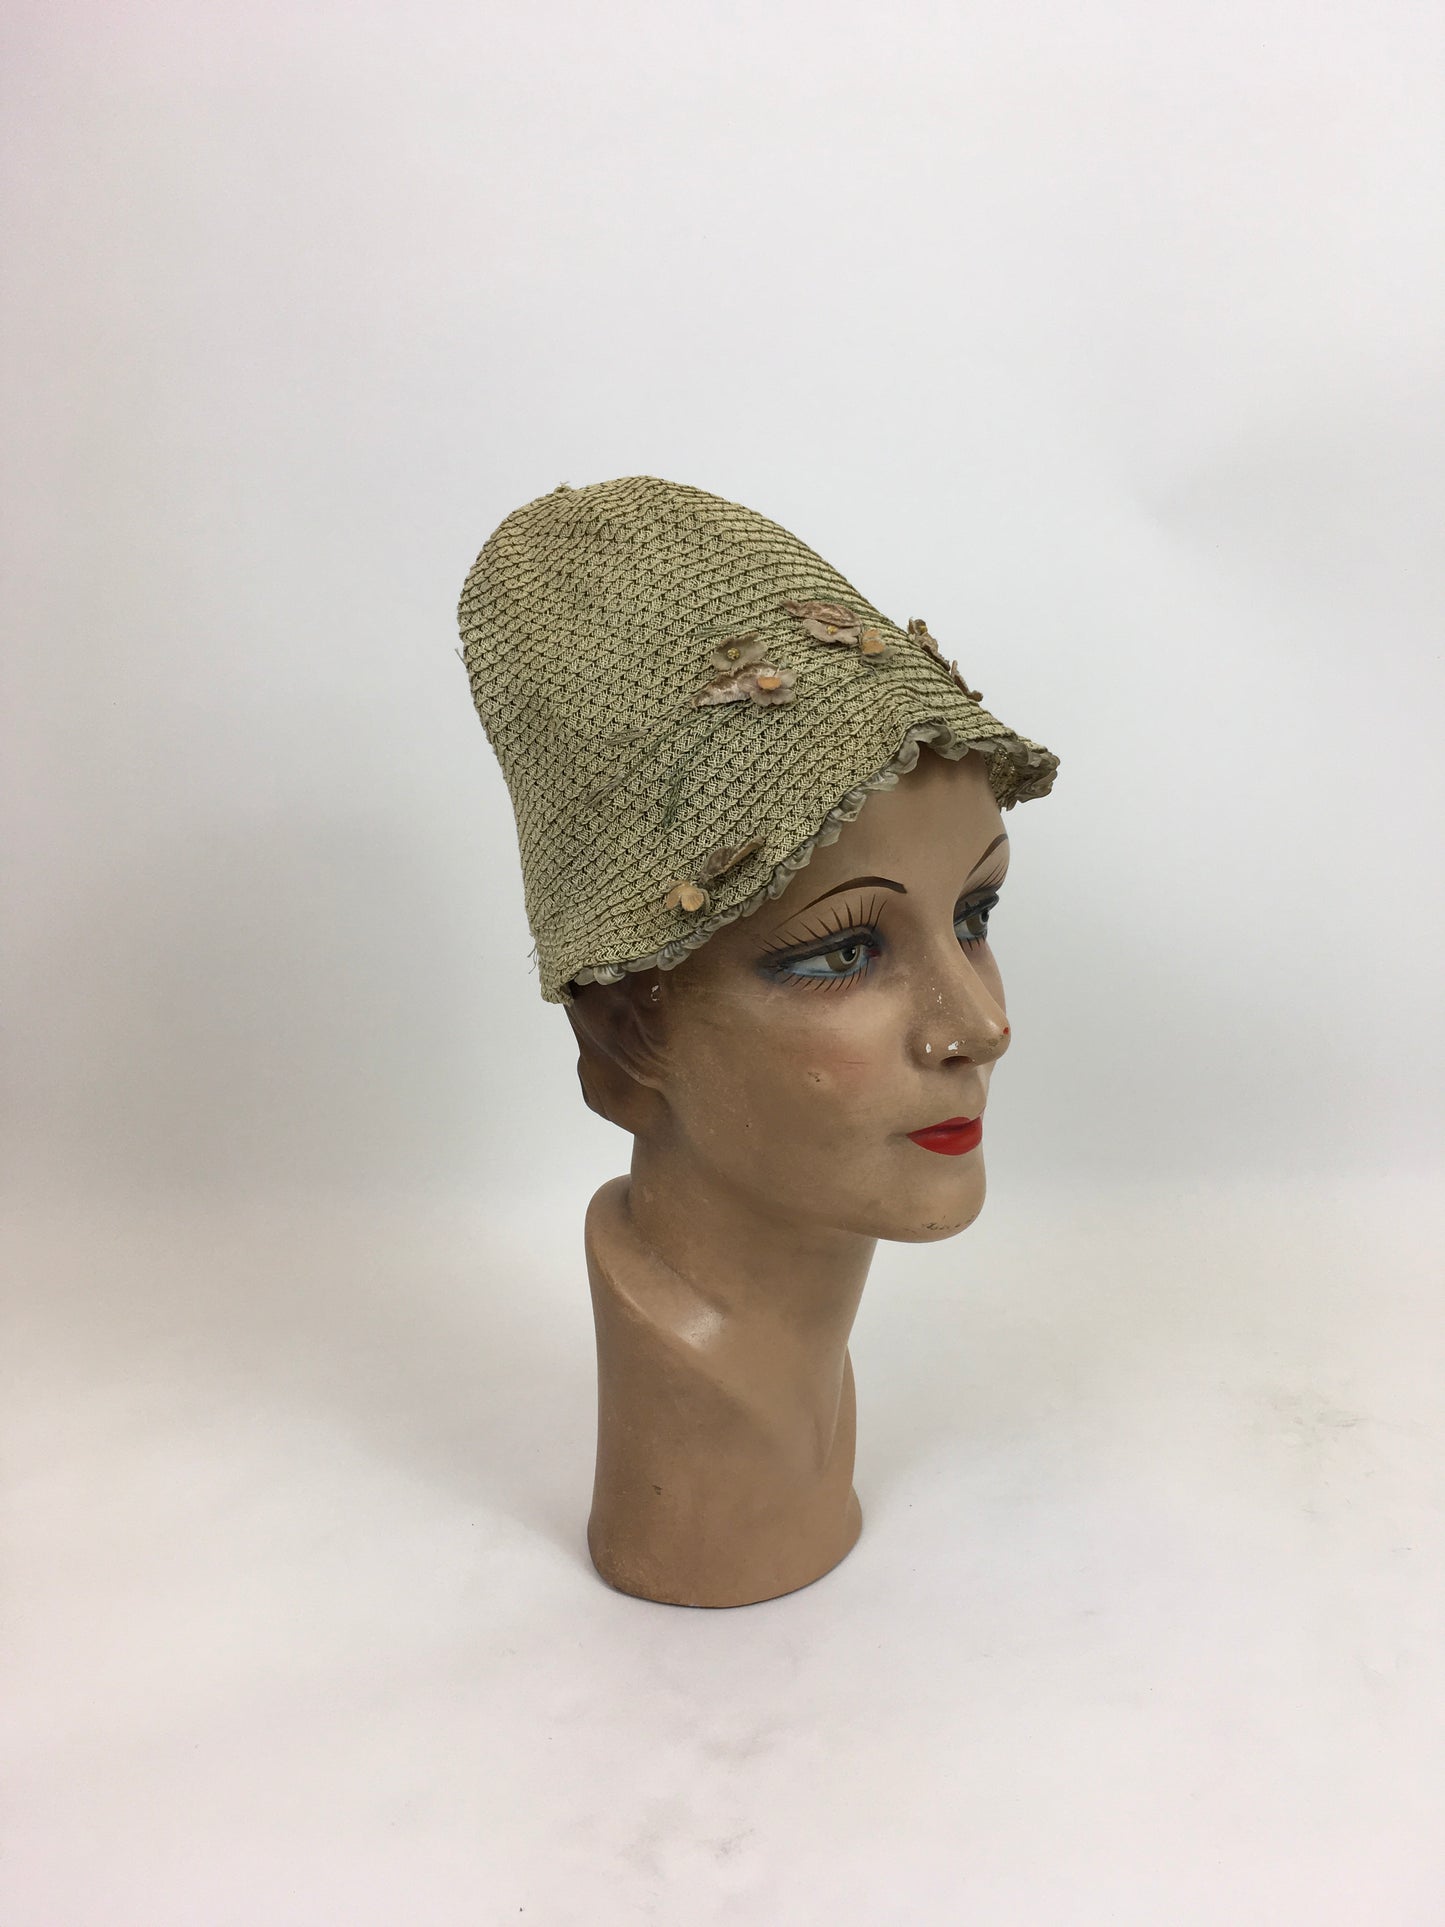 Original 1920's Darling Fabric Cloche Hat by ' Migola Reg'd' - With Dainty Velvet Floral Trims